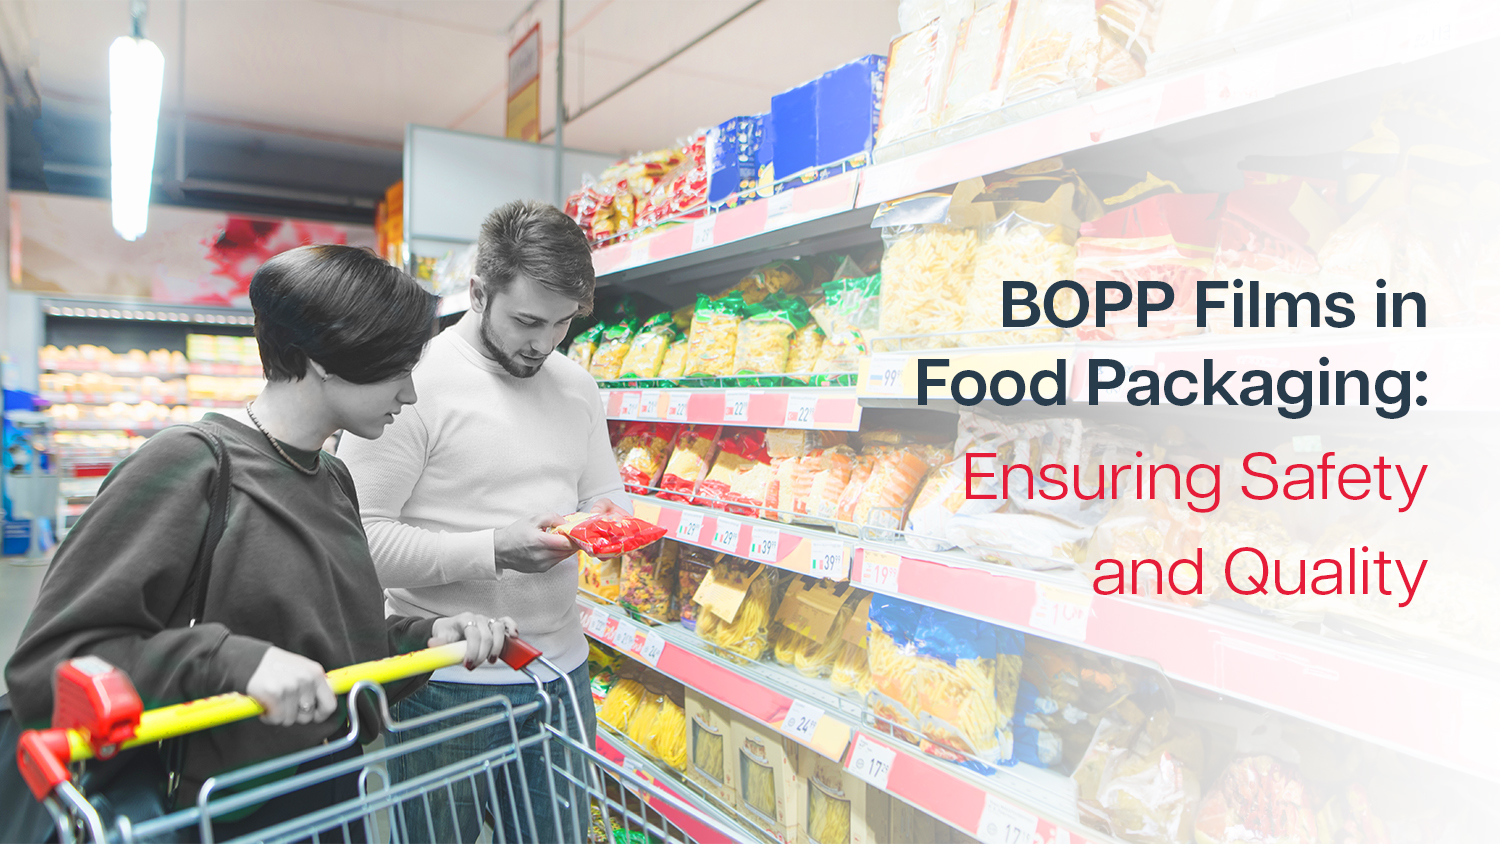 BOPP Films in Food Packaging: Ensuring Safety and Quality